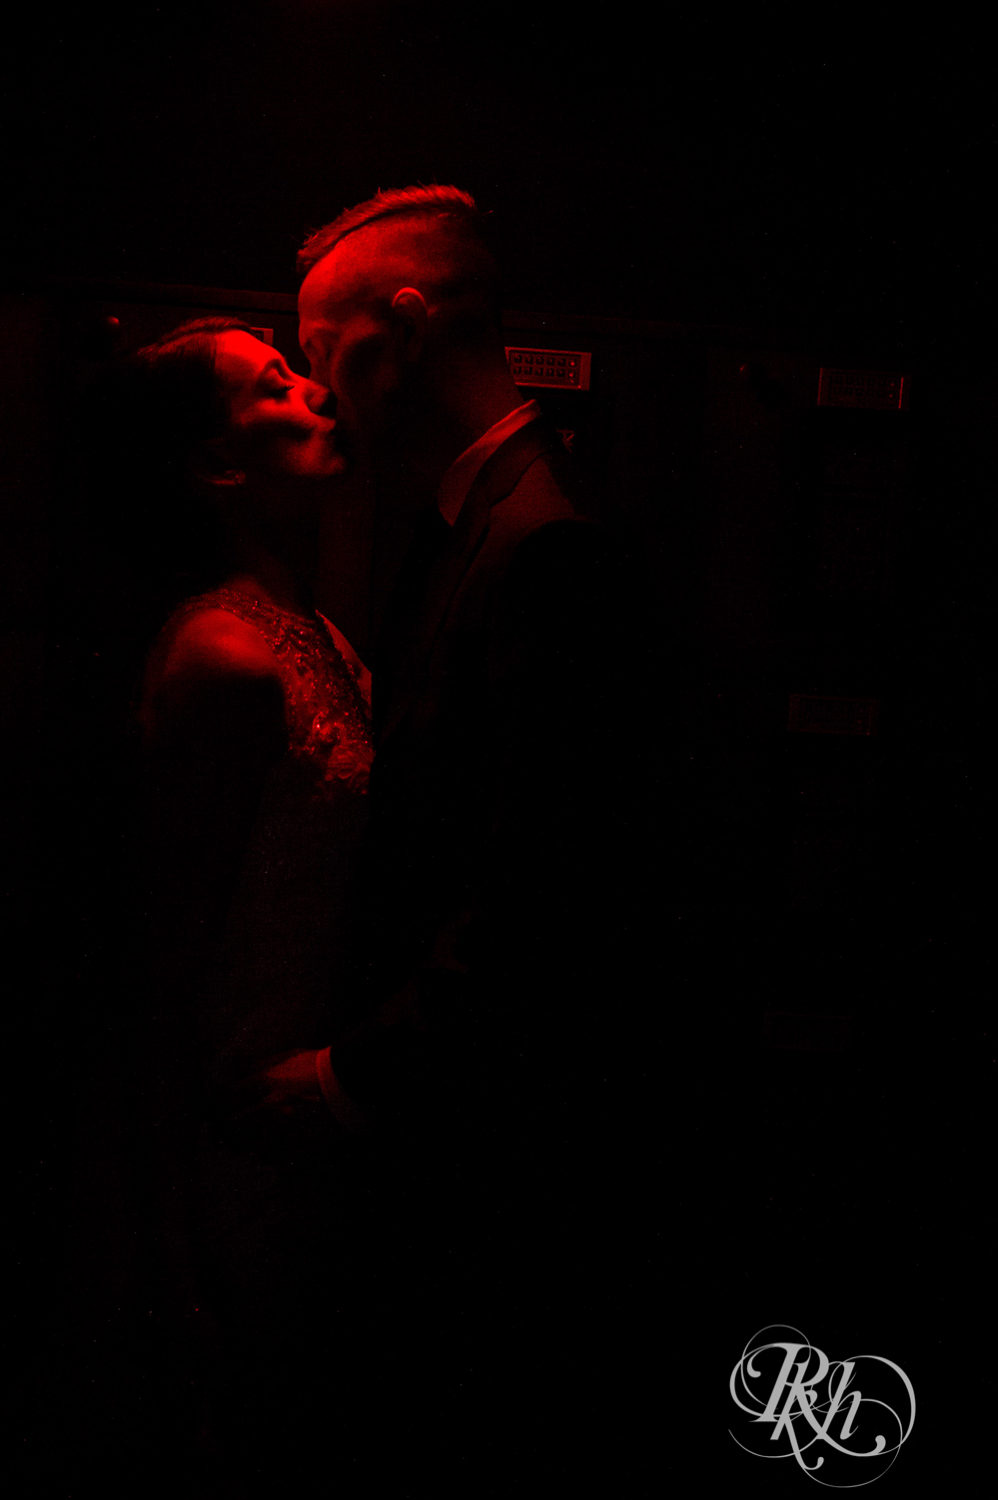 Bride and groom kiss in the Lumber Exchange Event Center in Minneapolis, Minnesota.